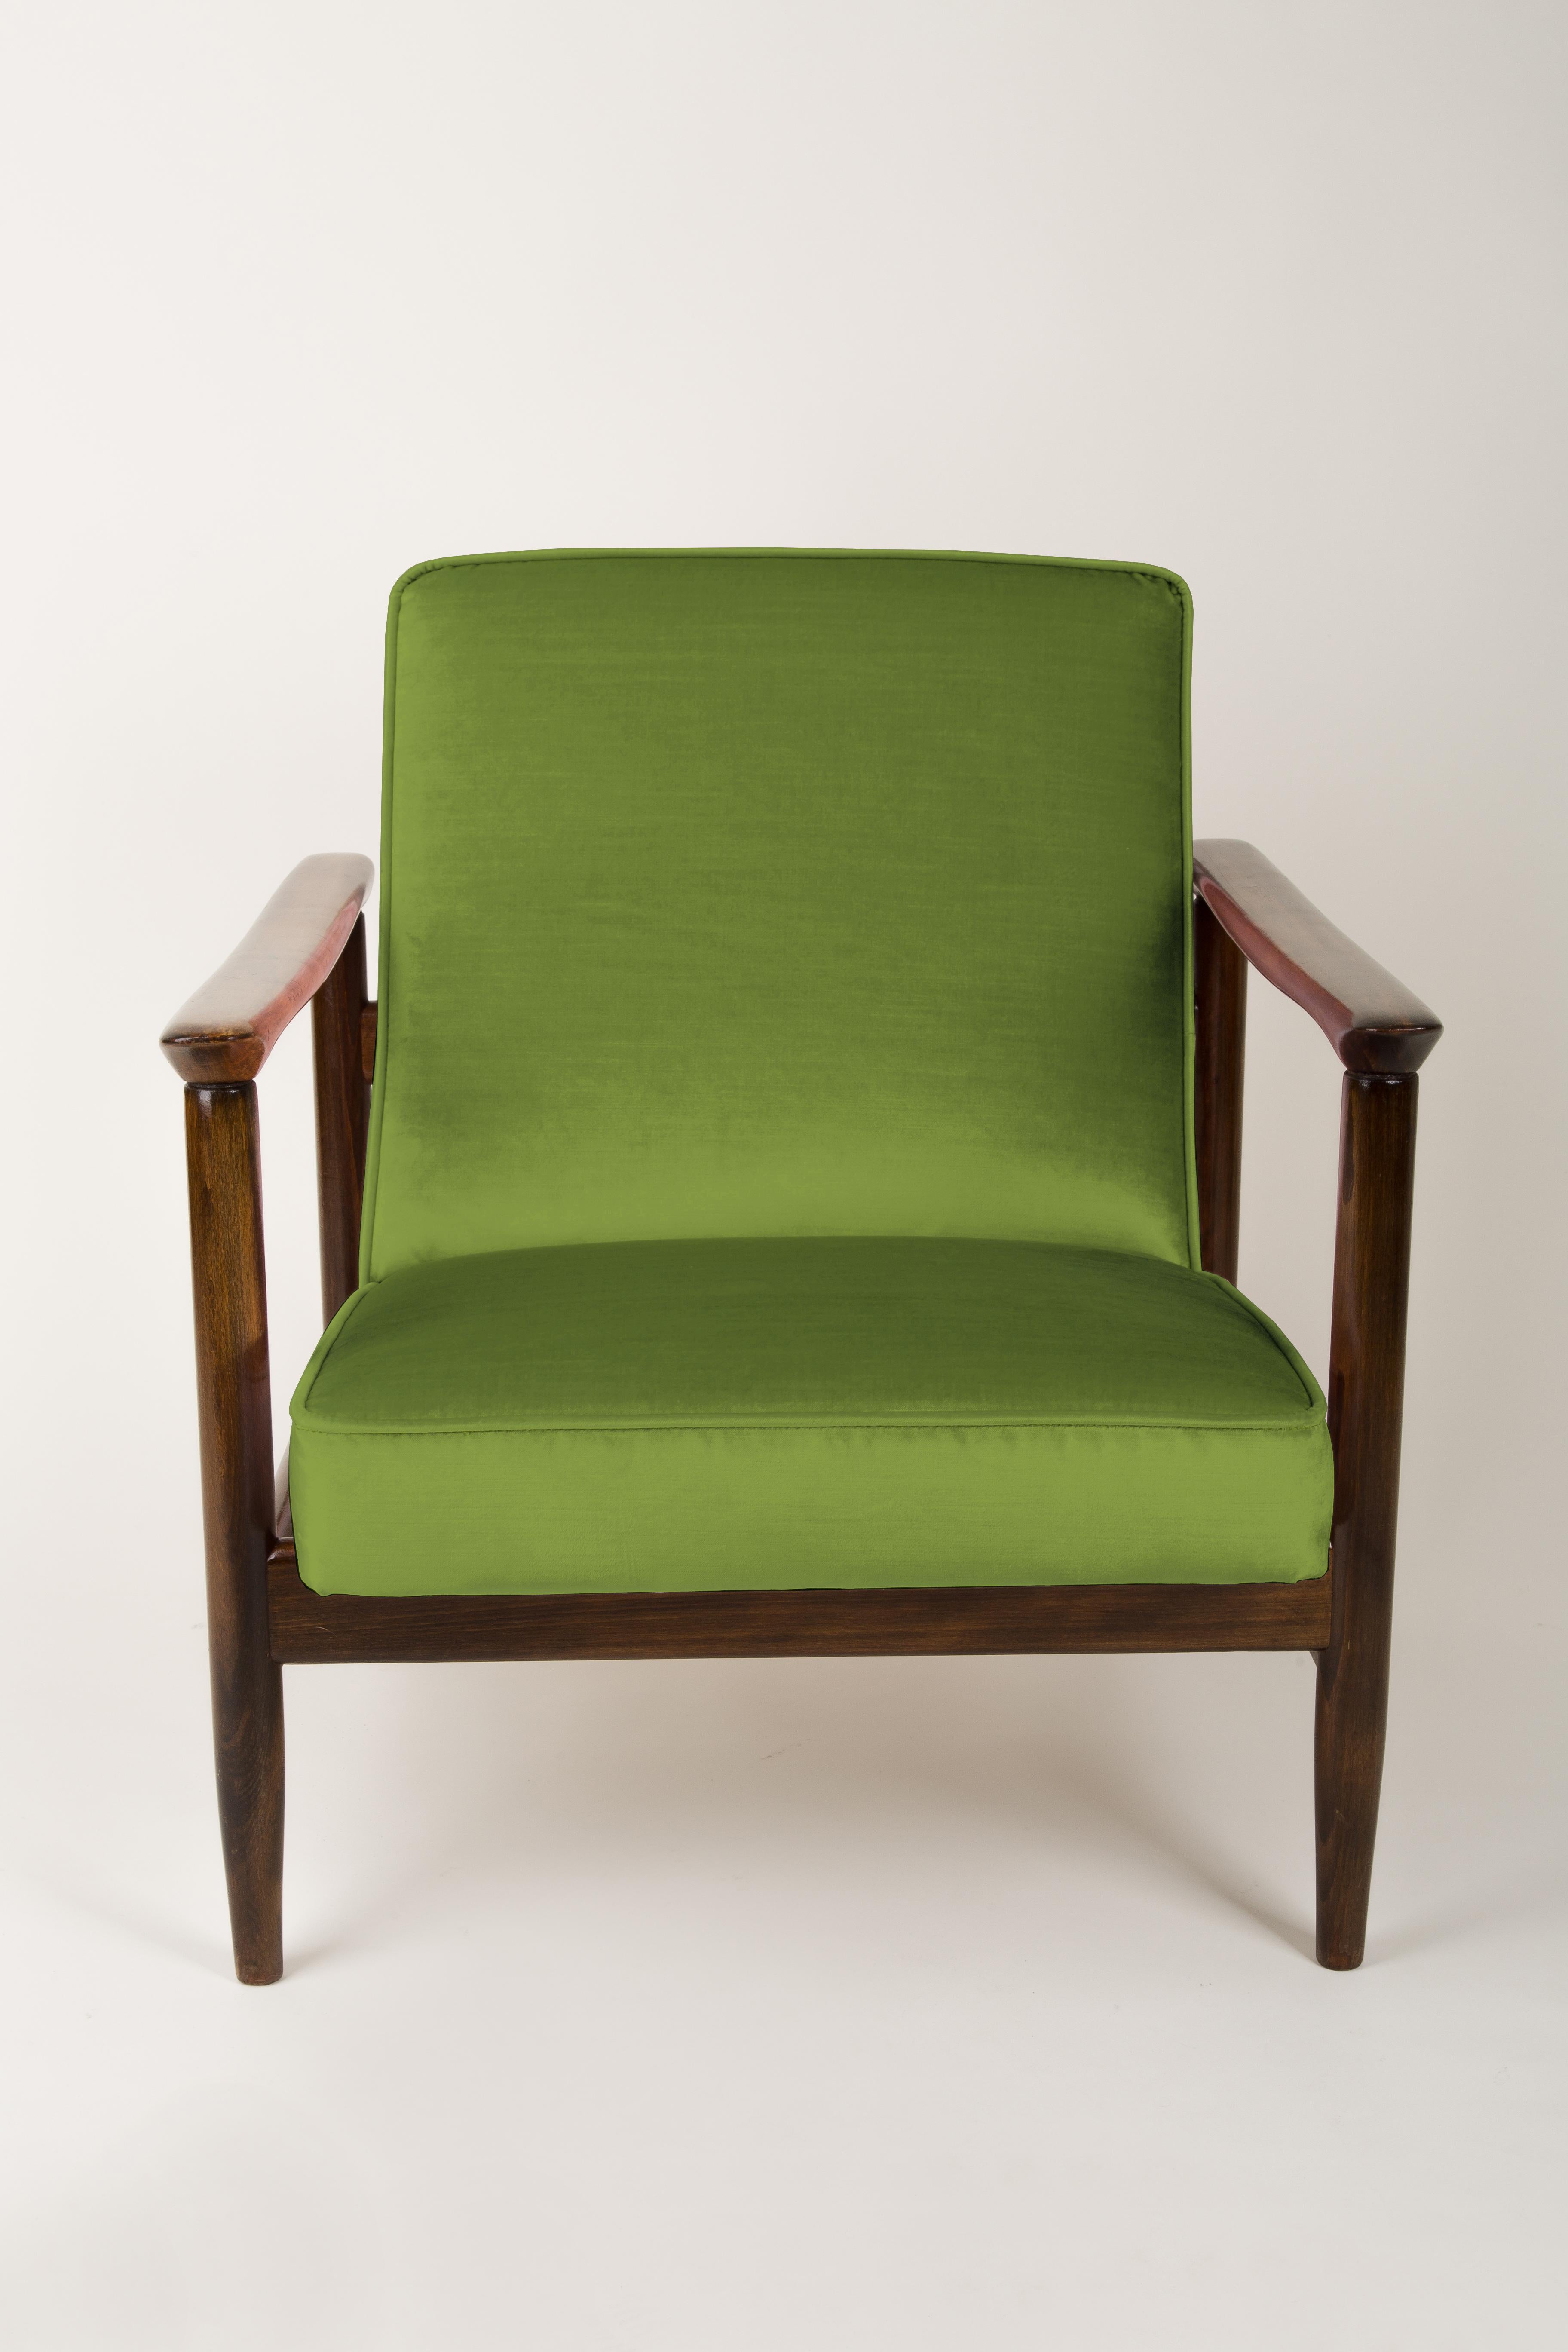 Hand-Crafted Pair of Green Armchairs, Edmund Homa, GFM-142, 1960s, Poland For Sale